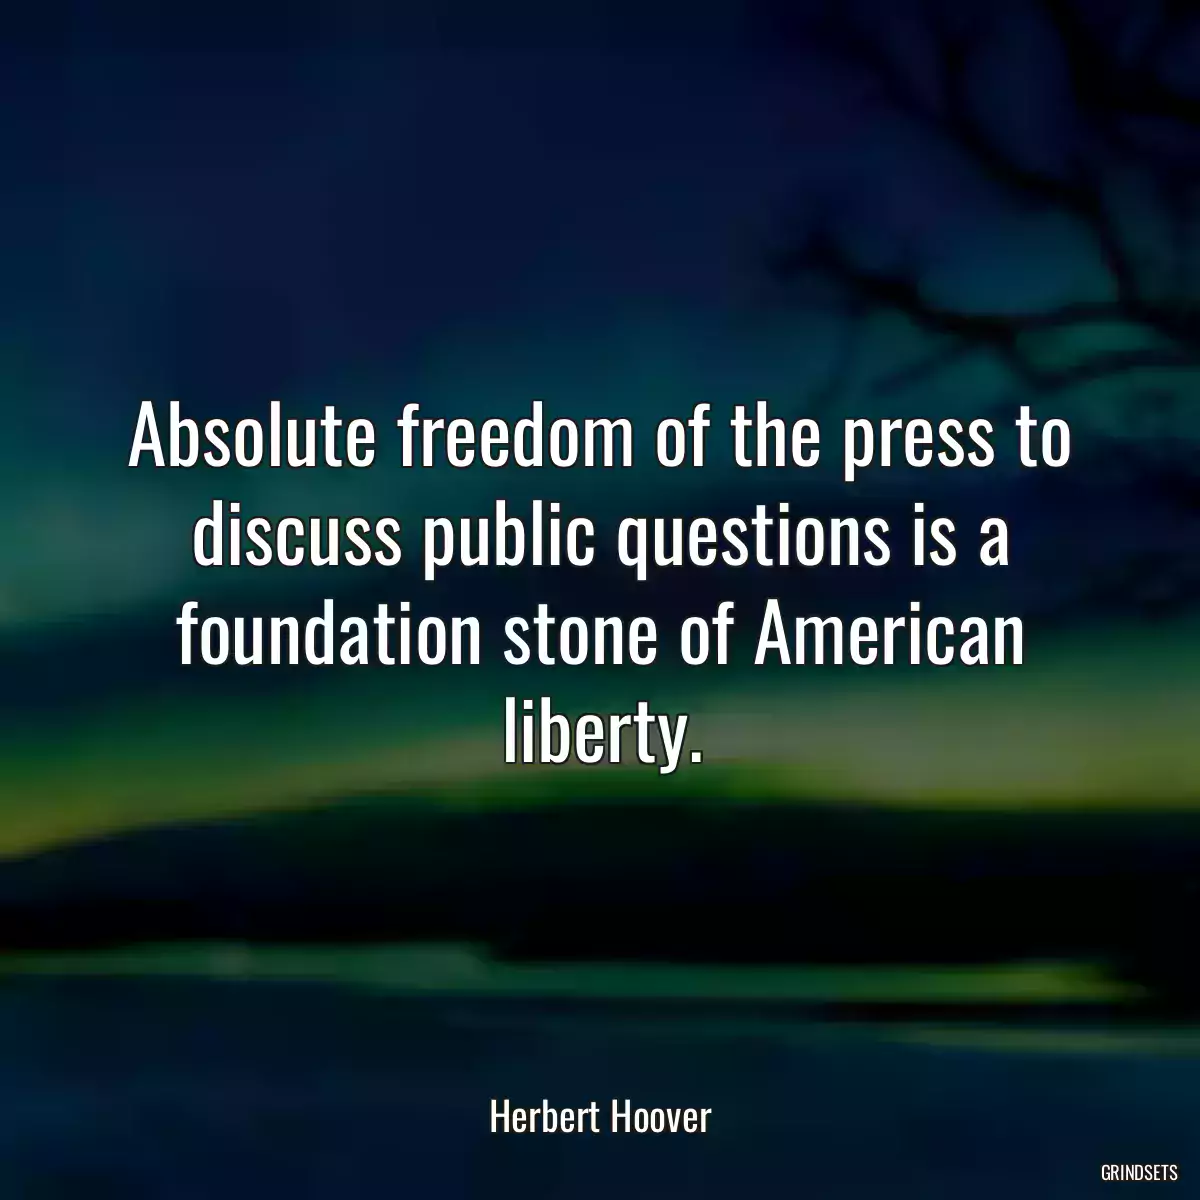 Absolute freedom of the press to discuss public questions is a foundation stone of American liberty.